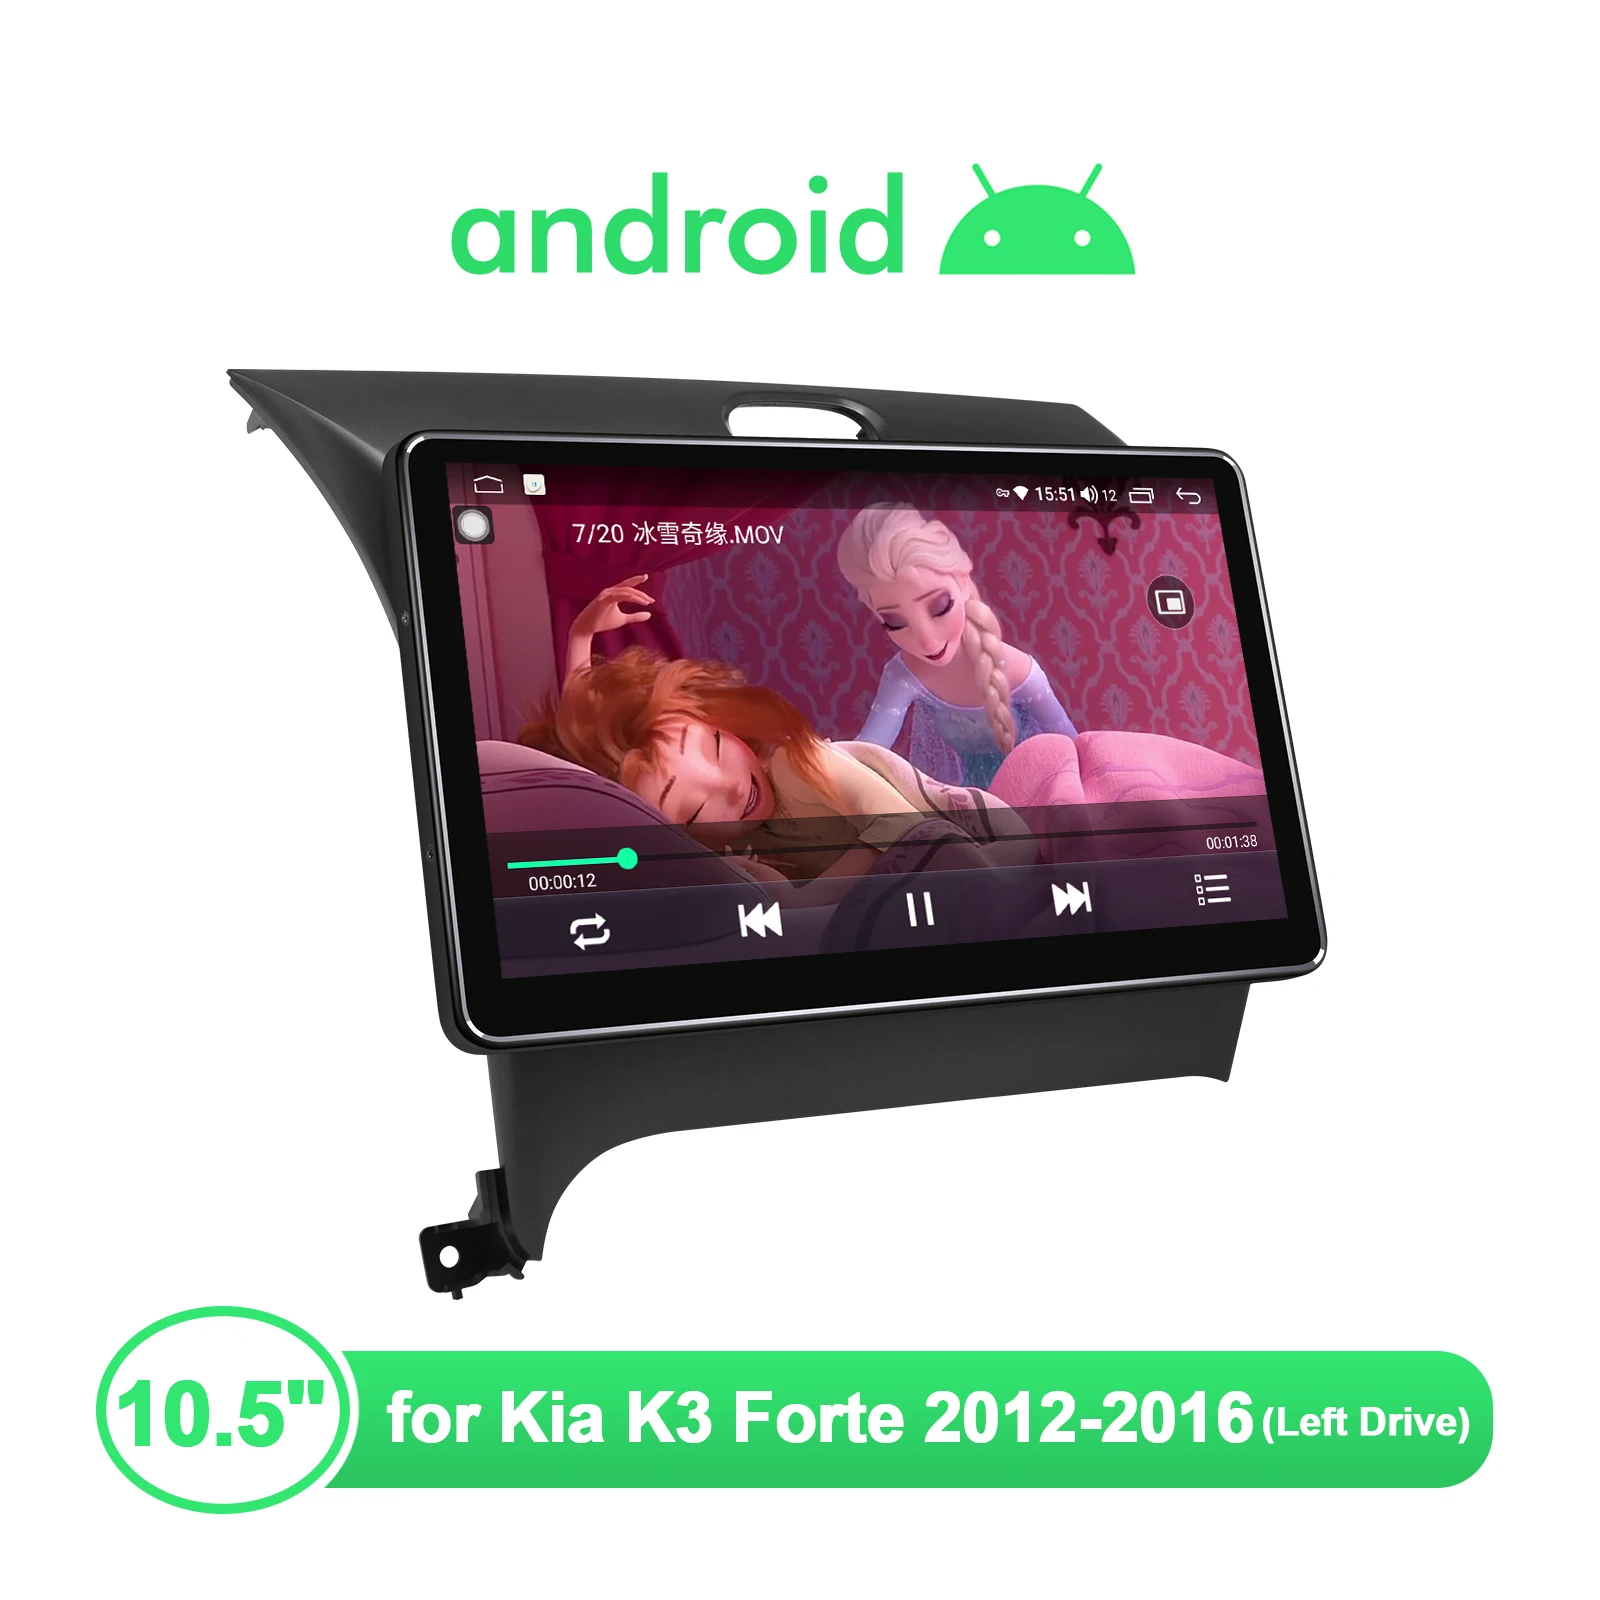 

JOYING 1280*720 Screen Android10.0 Car Radio Stereo 10.5 Inch WiFi Bluetooth GPS Fast Boot For Kia K3 Forte 2012-2016（Left Drive